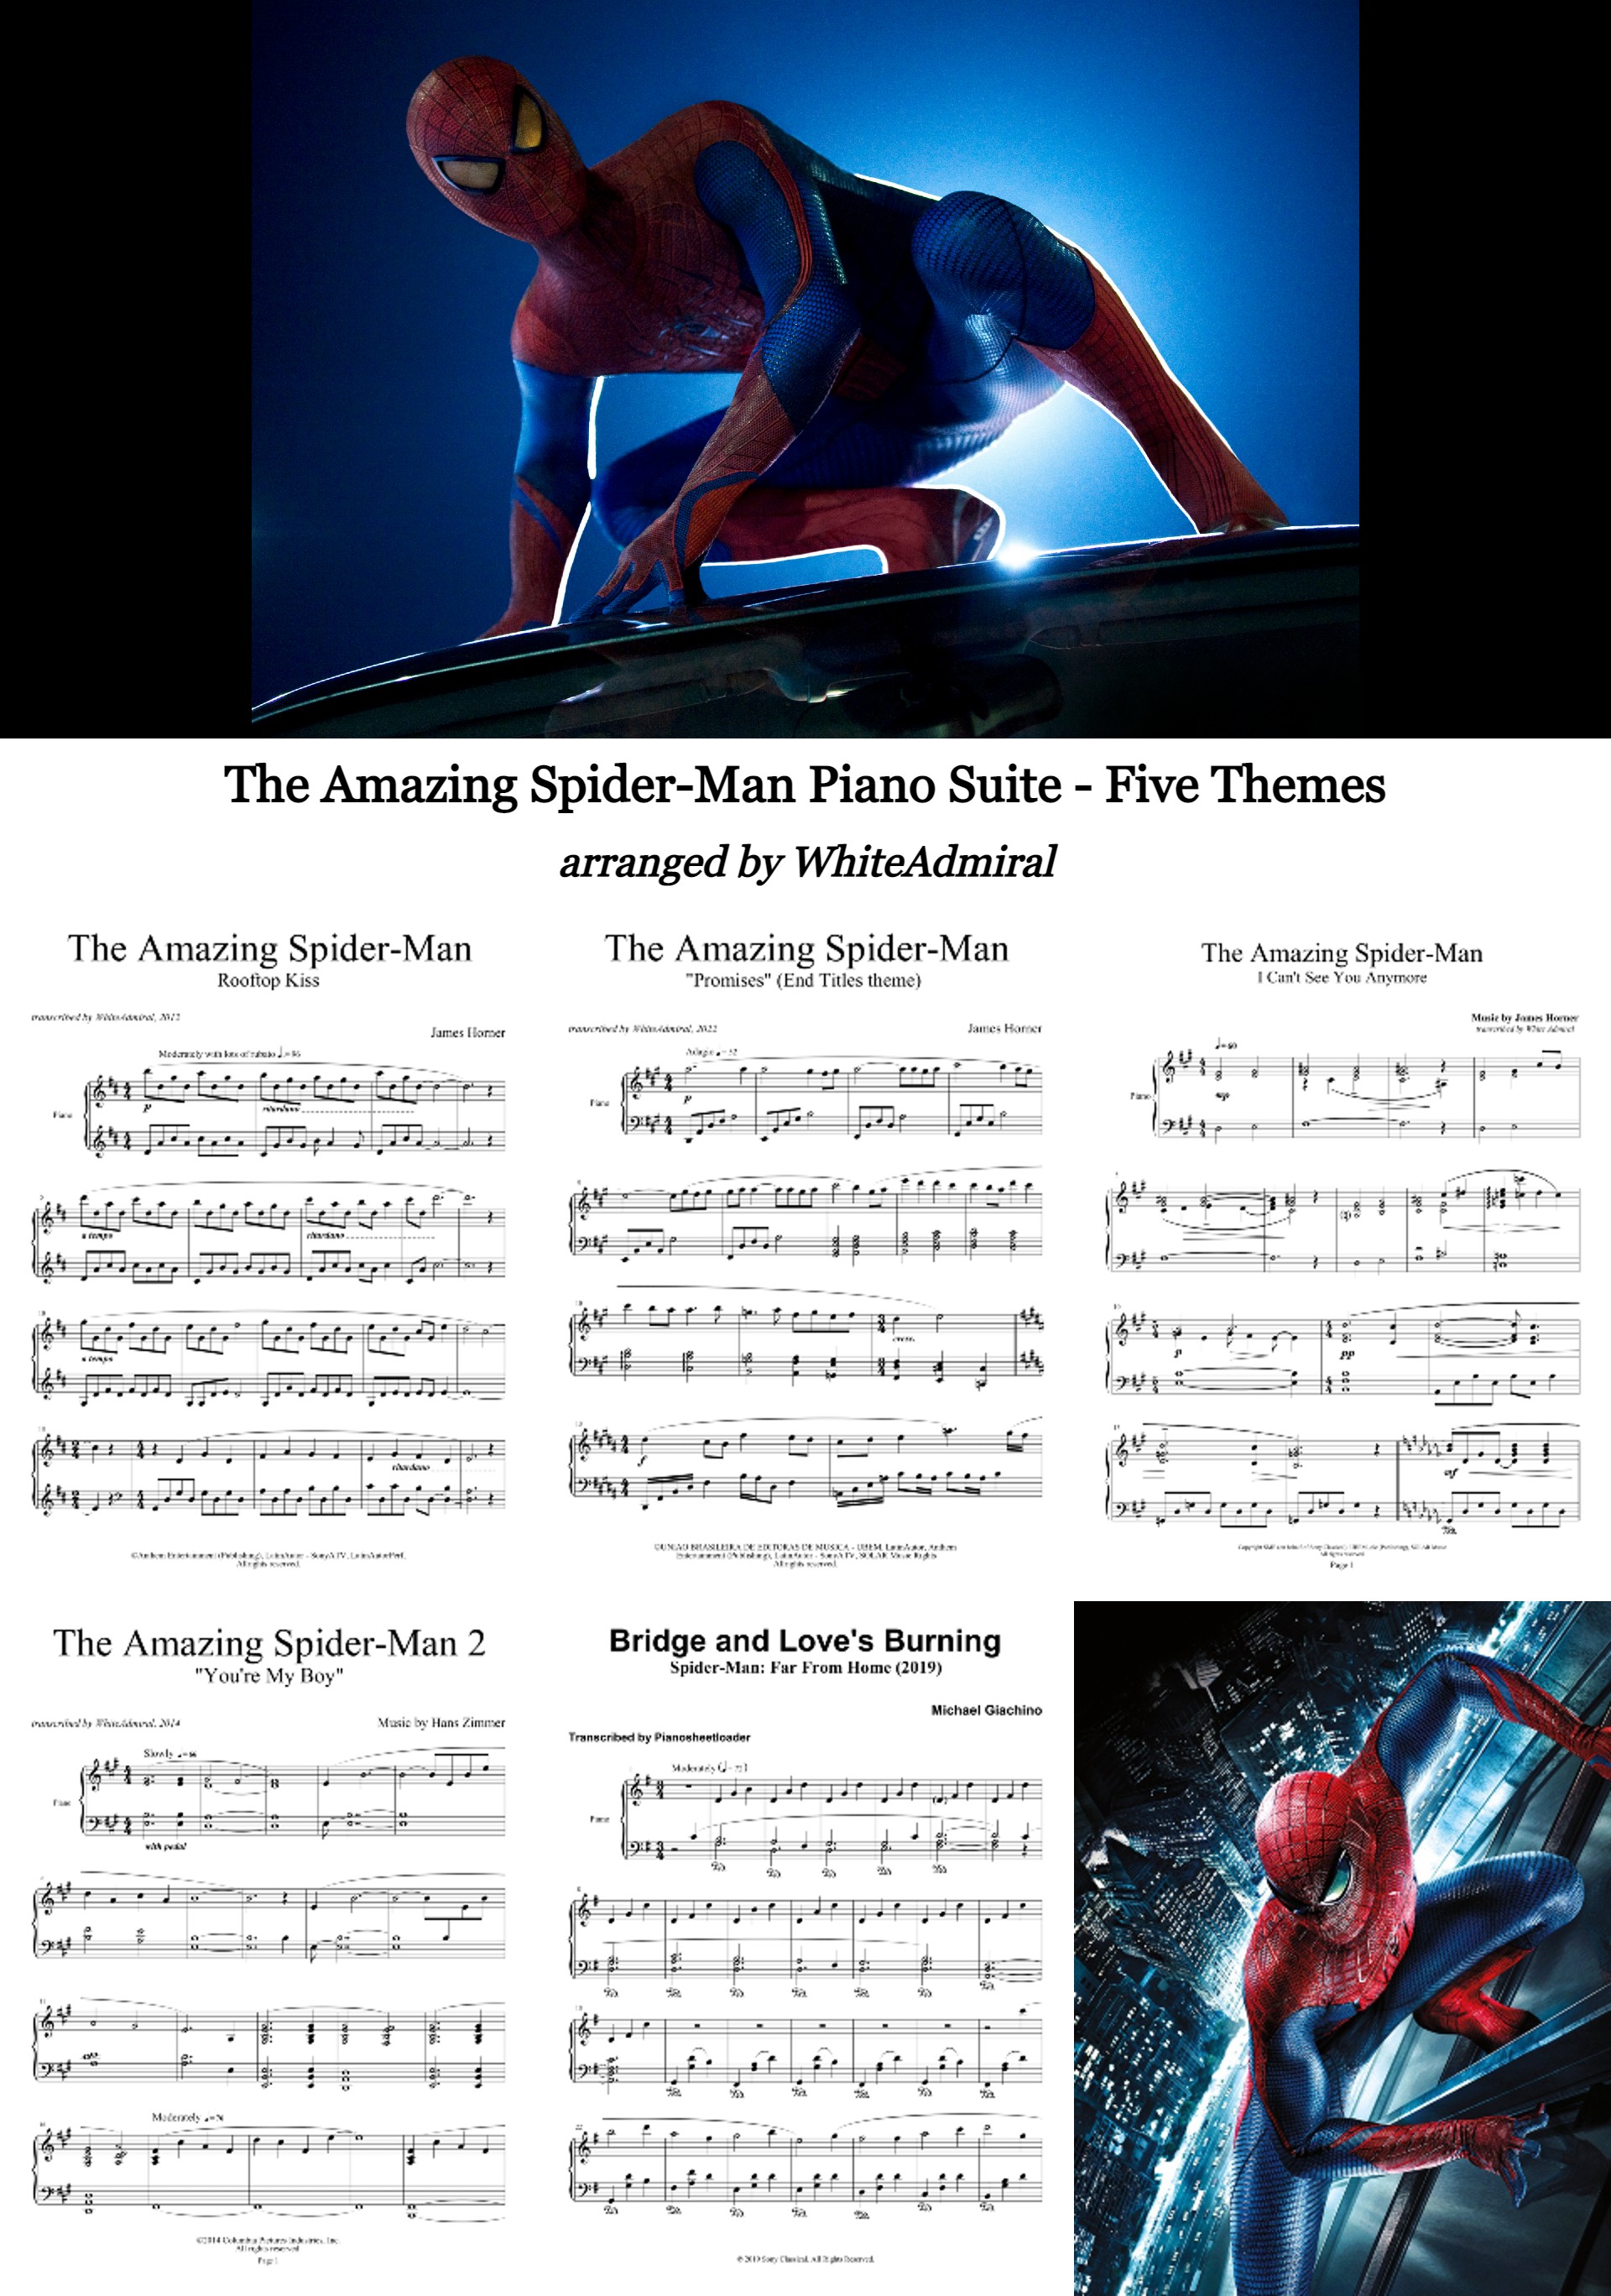 The Amazing Spider-Man Piano Suite - Five Themes.jpg